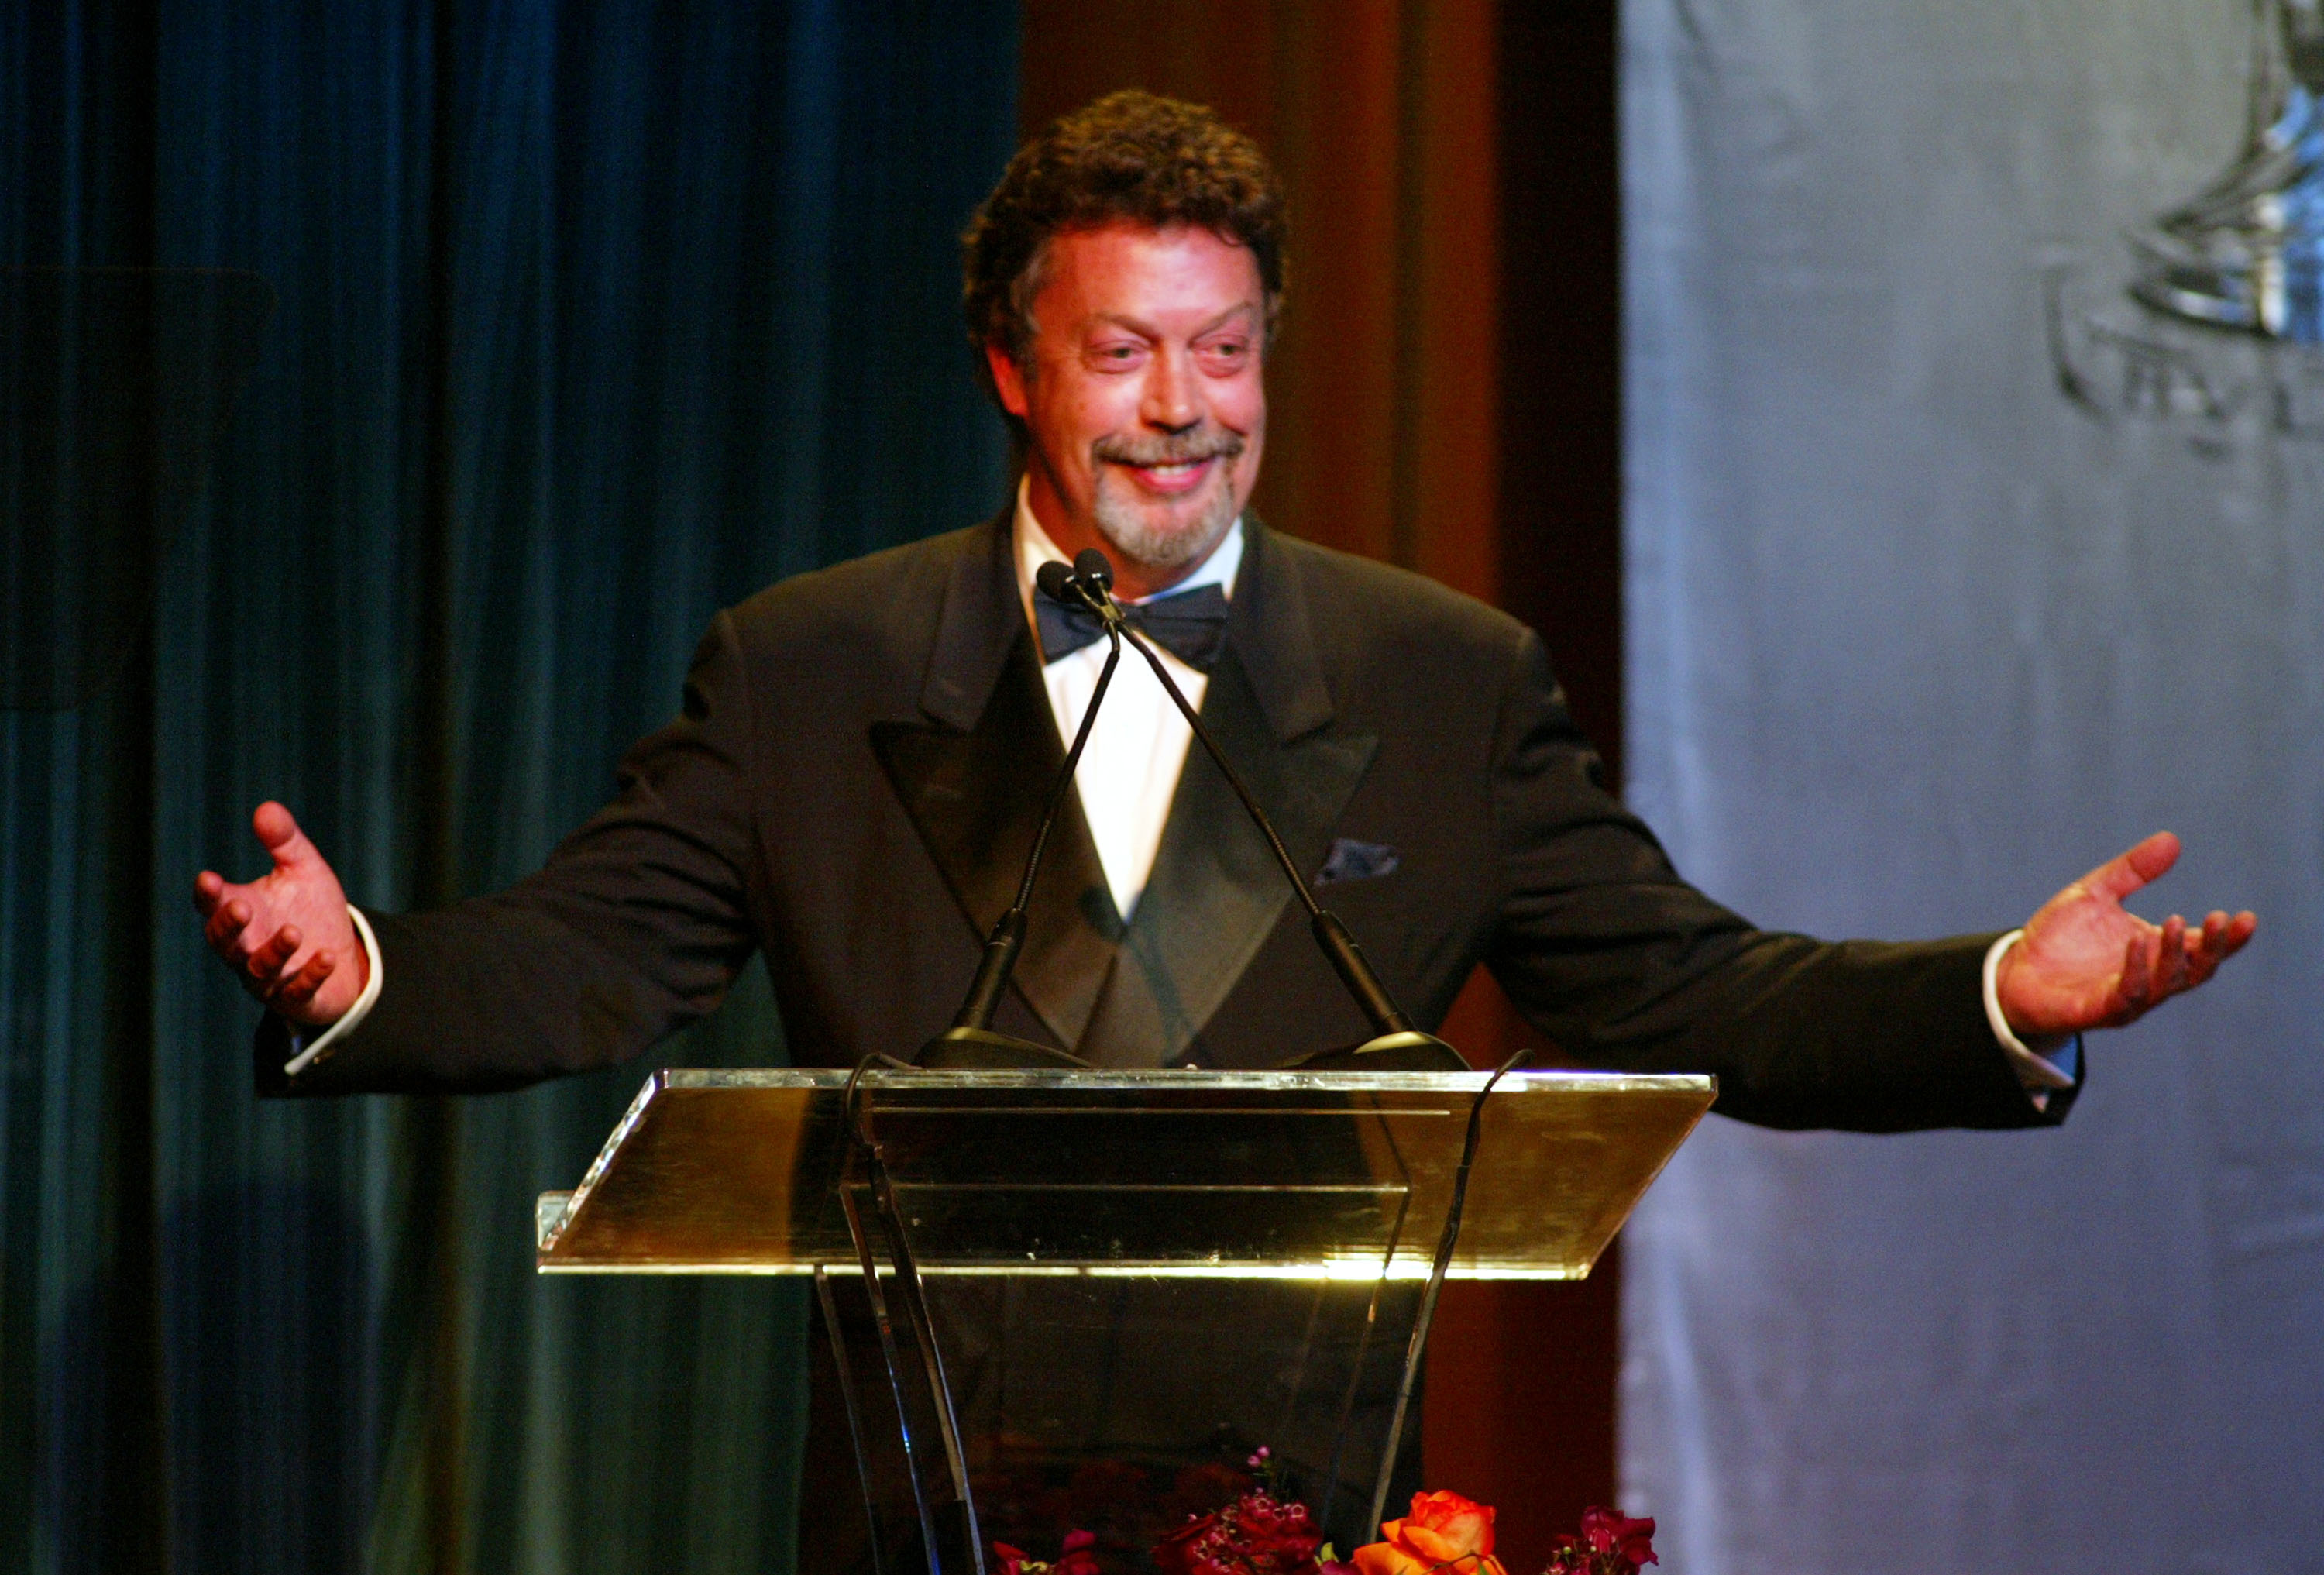 Actor Tim Curry presents the award for Excellence in Film, Contemporary during the 5th Annual Costume Designers Guild Awards at the Beverly Wilshire Hotel on March 16, 2003 in Beverly Hills, California.  | Source: Getty Images